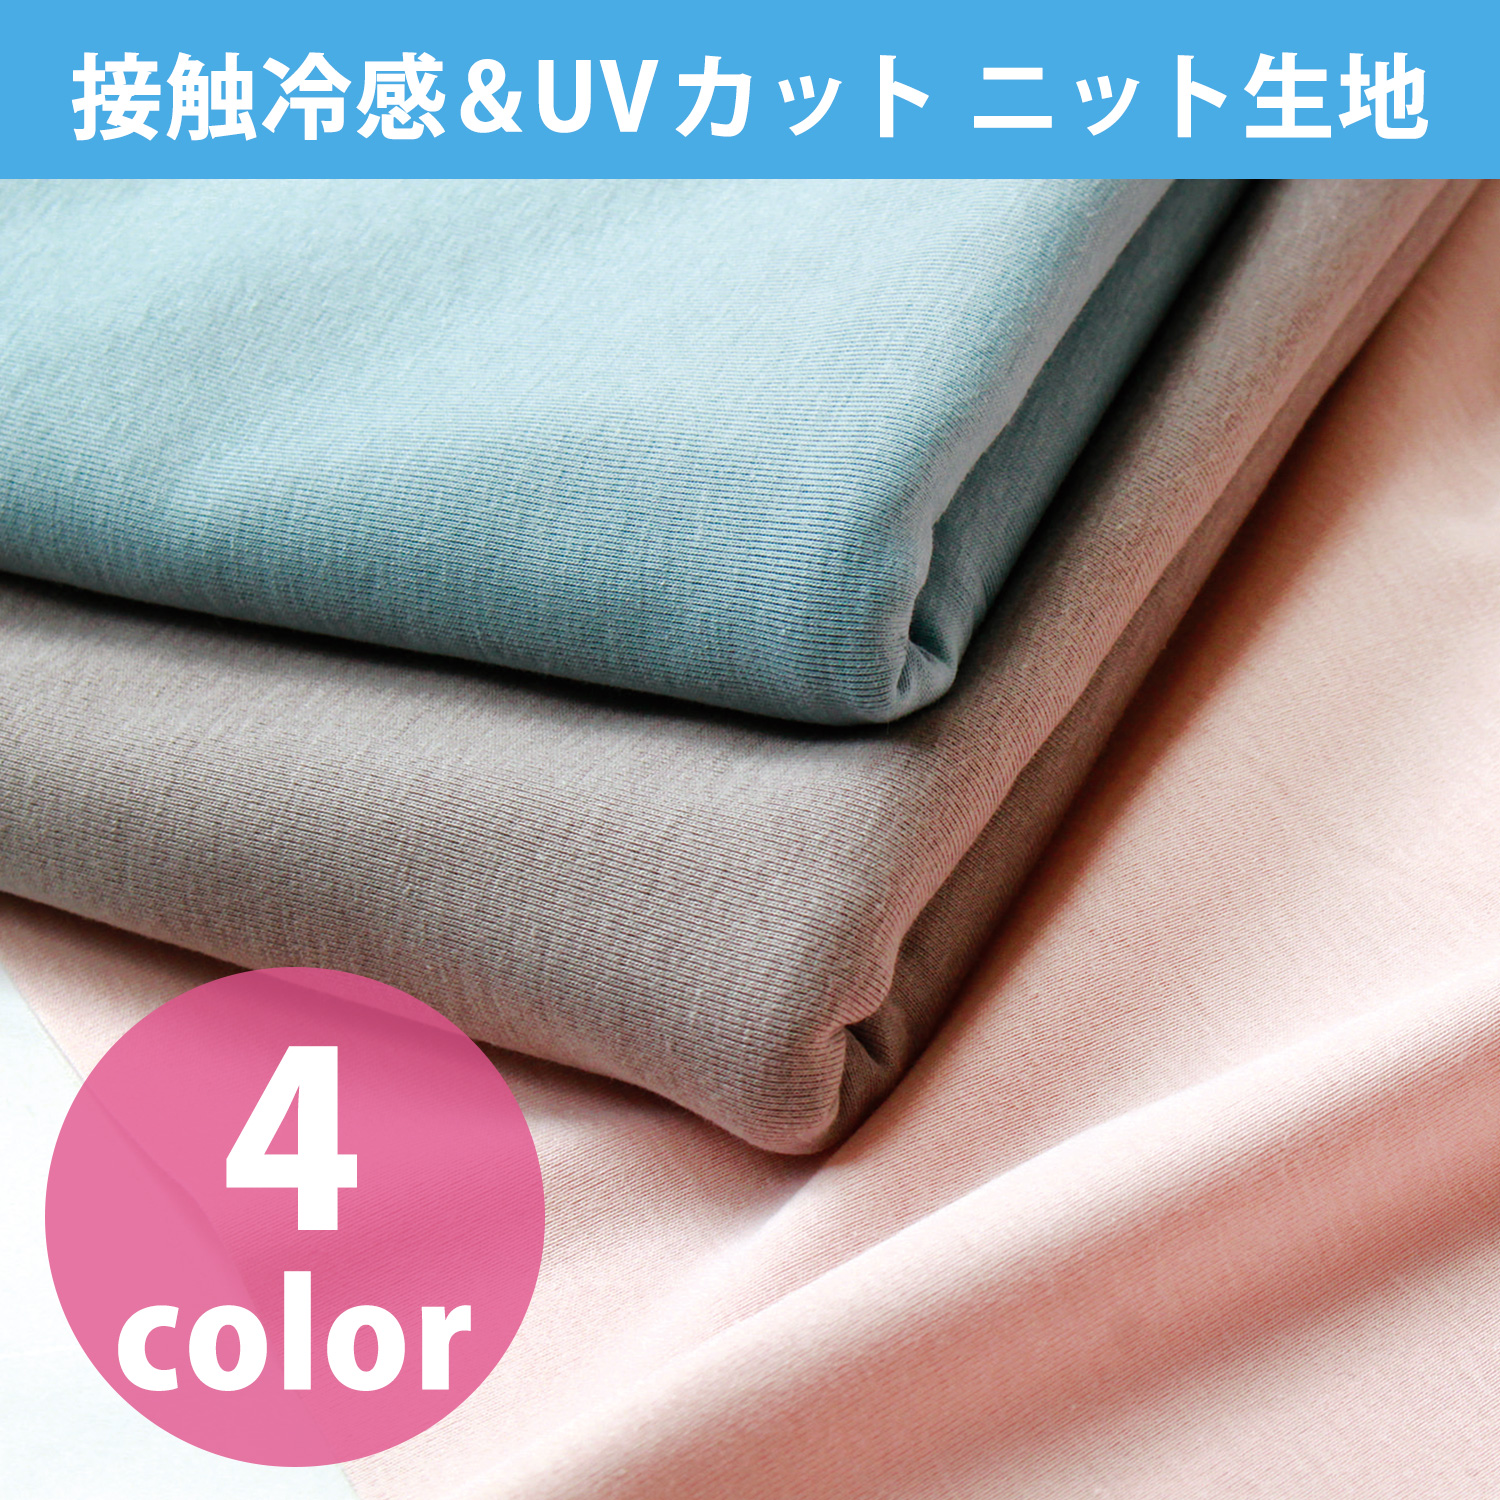 489C Cool touch UV protection knit fabric Width approx. 145cm x 50cm (sheets)